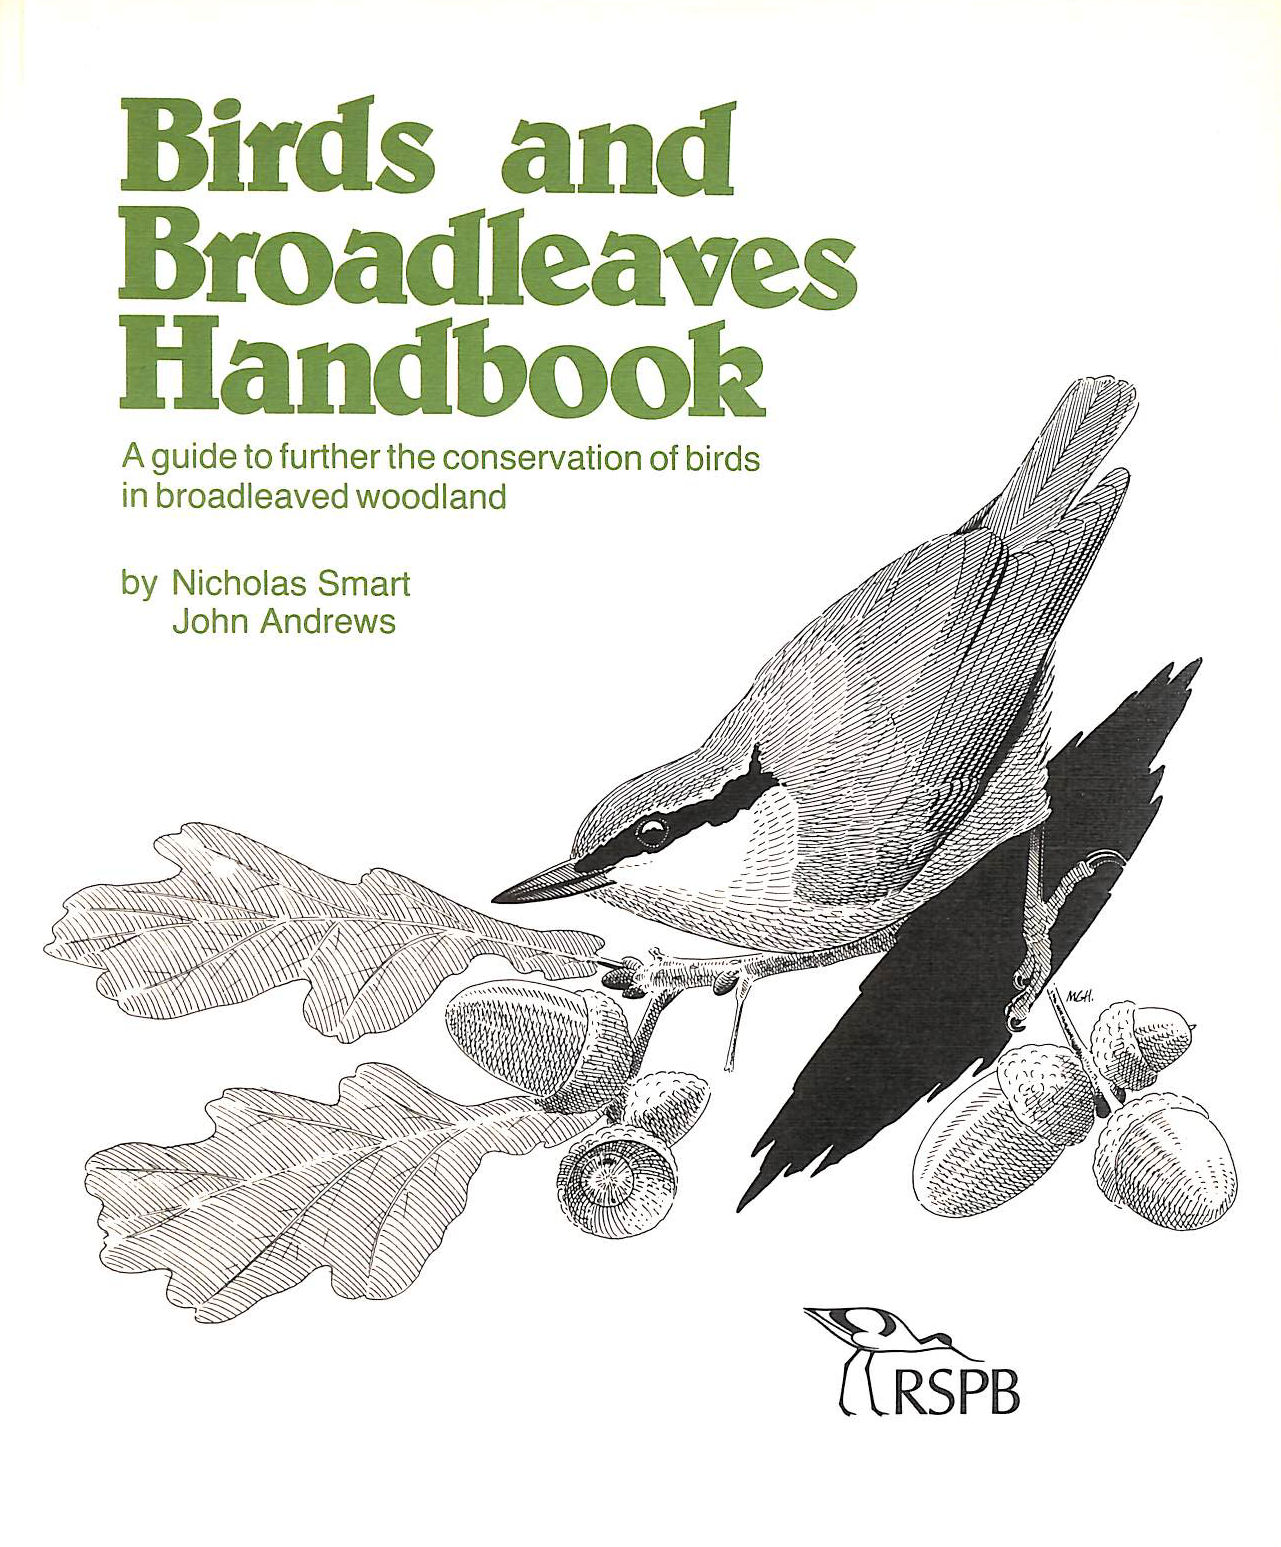 NICHOLAS SMART; JOHN ANDREWS - Birds and broadleaves handbook: a guide to further the conservation of birds in broadleaved woodland